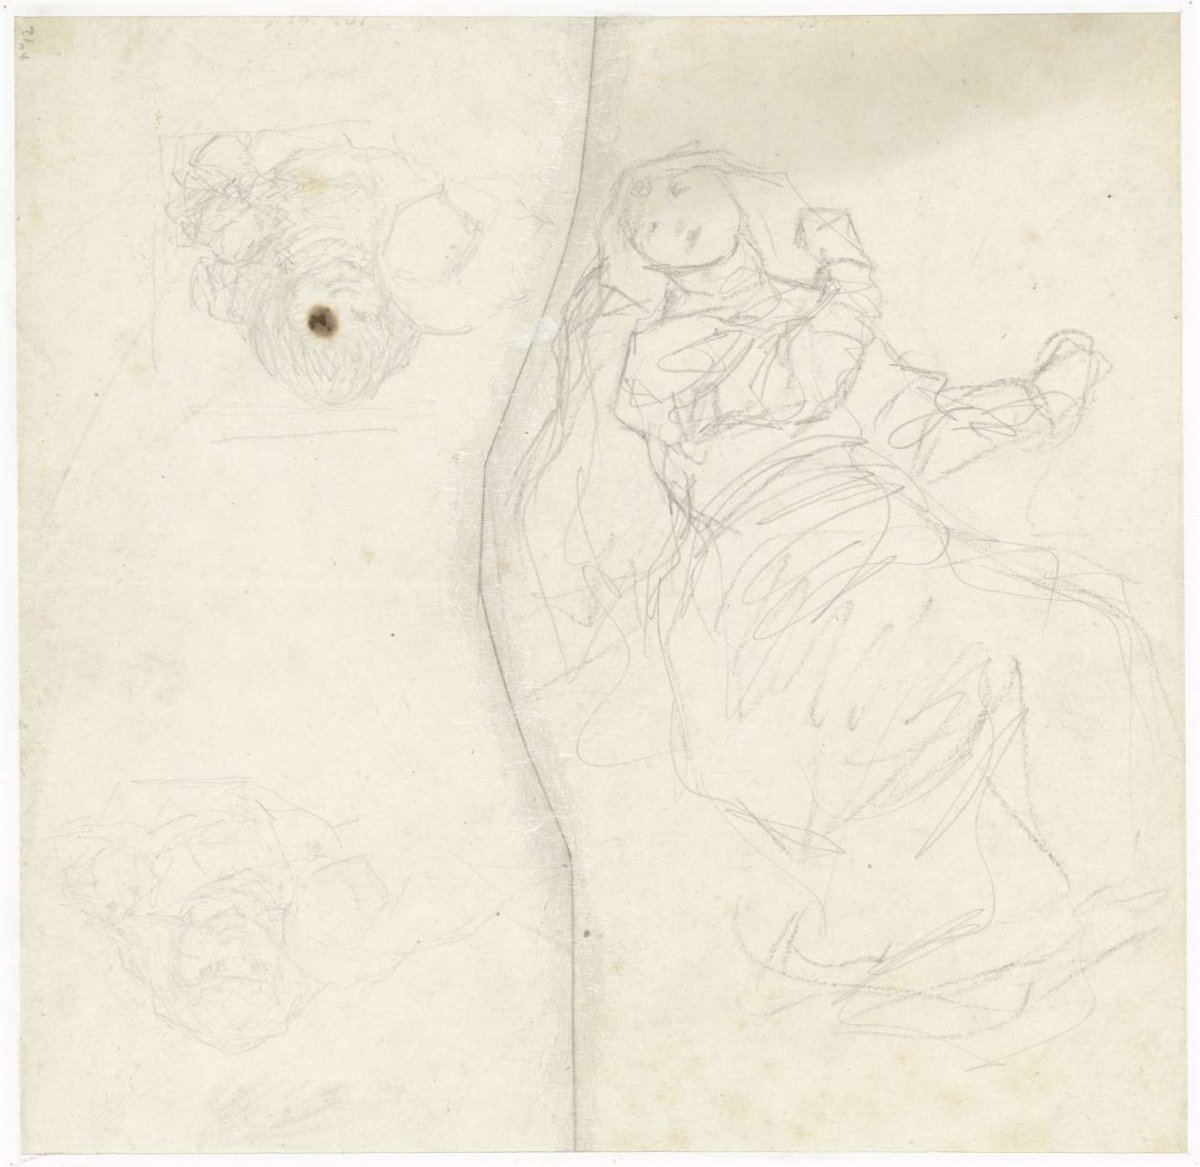 Sketch of a woman with butterflies and two studies of a girl, Matthijs Maris, 1849 - 1917